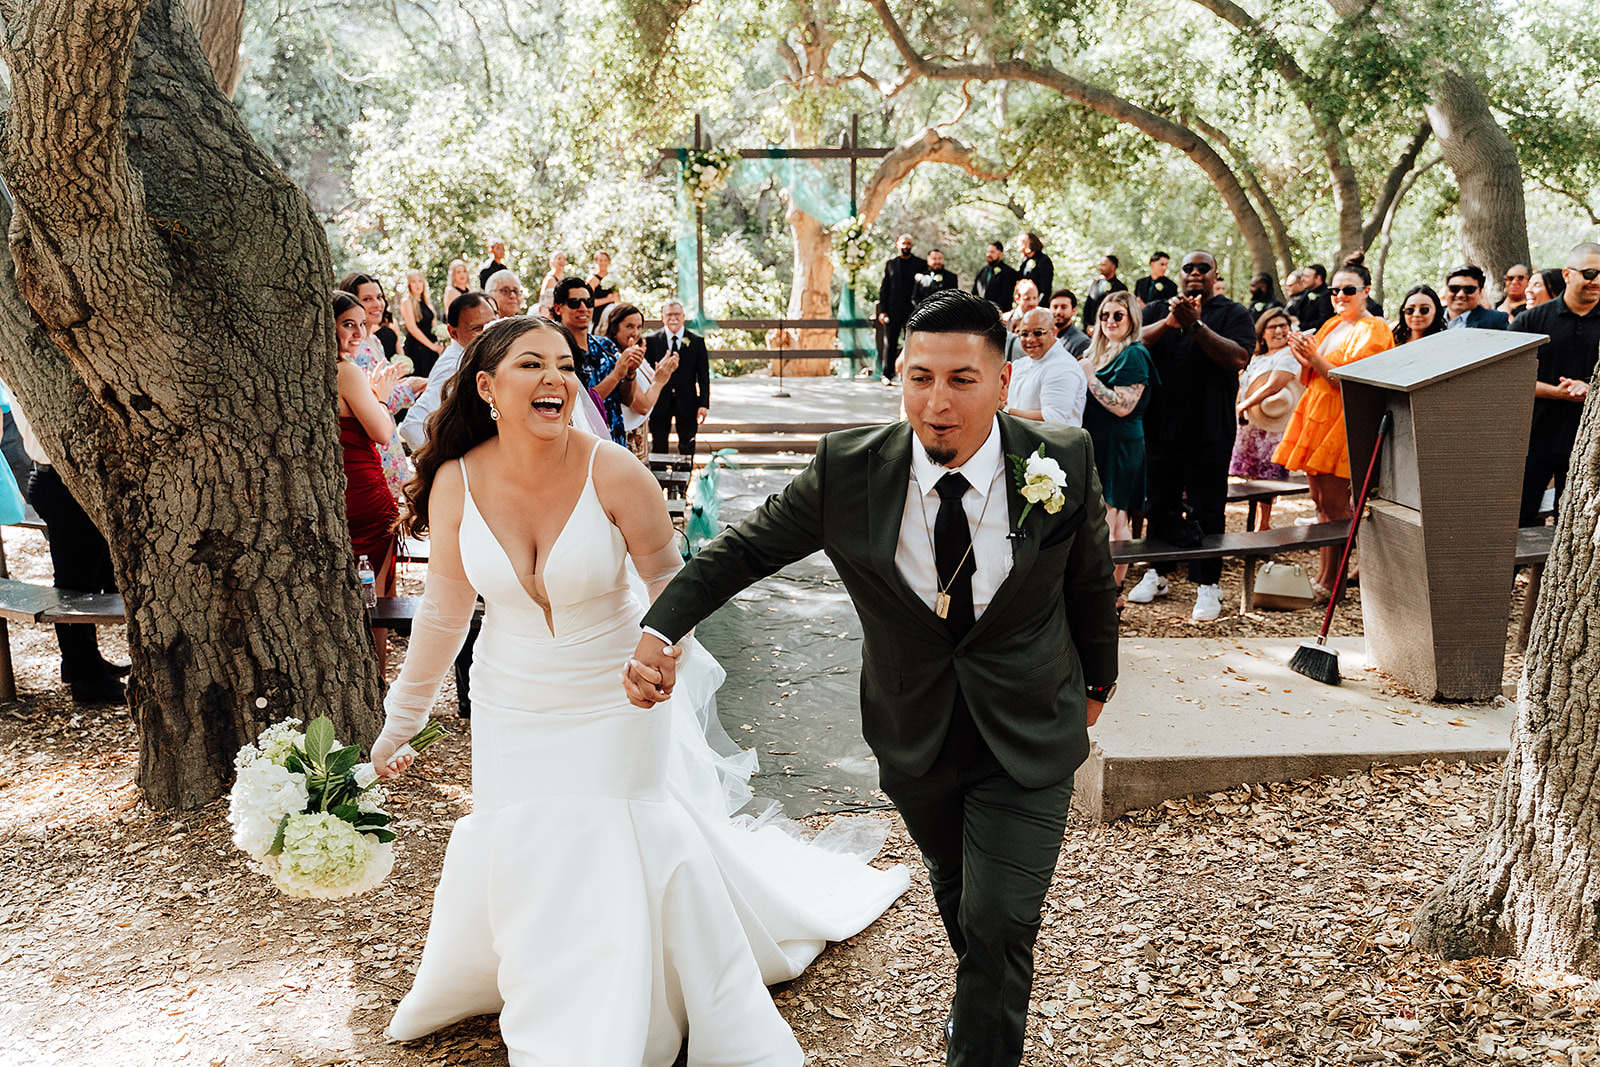 Bride and groom celebrating their marriage at the Oak Canyon Nature Center Orange County California